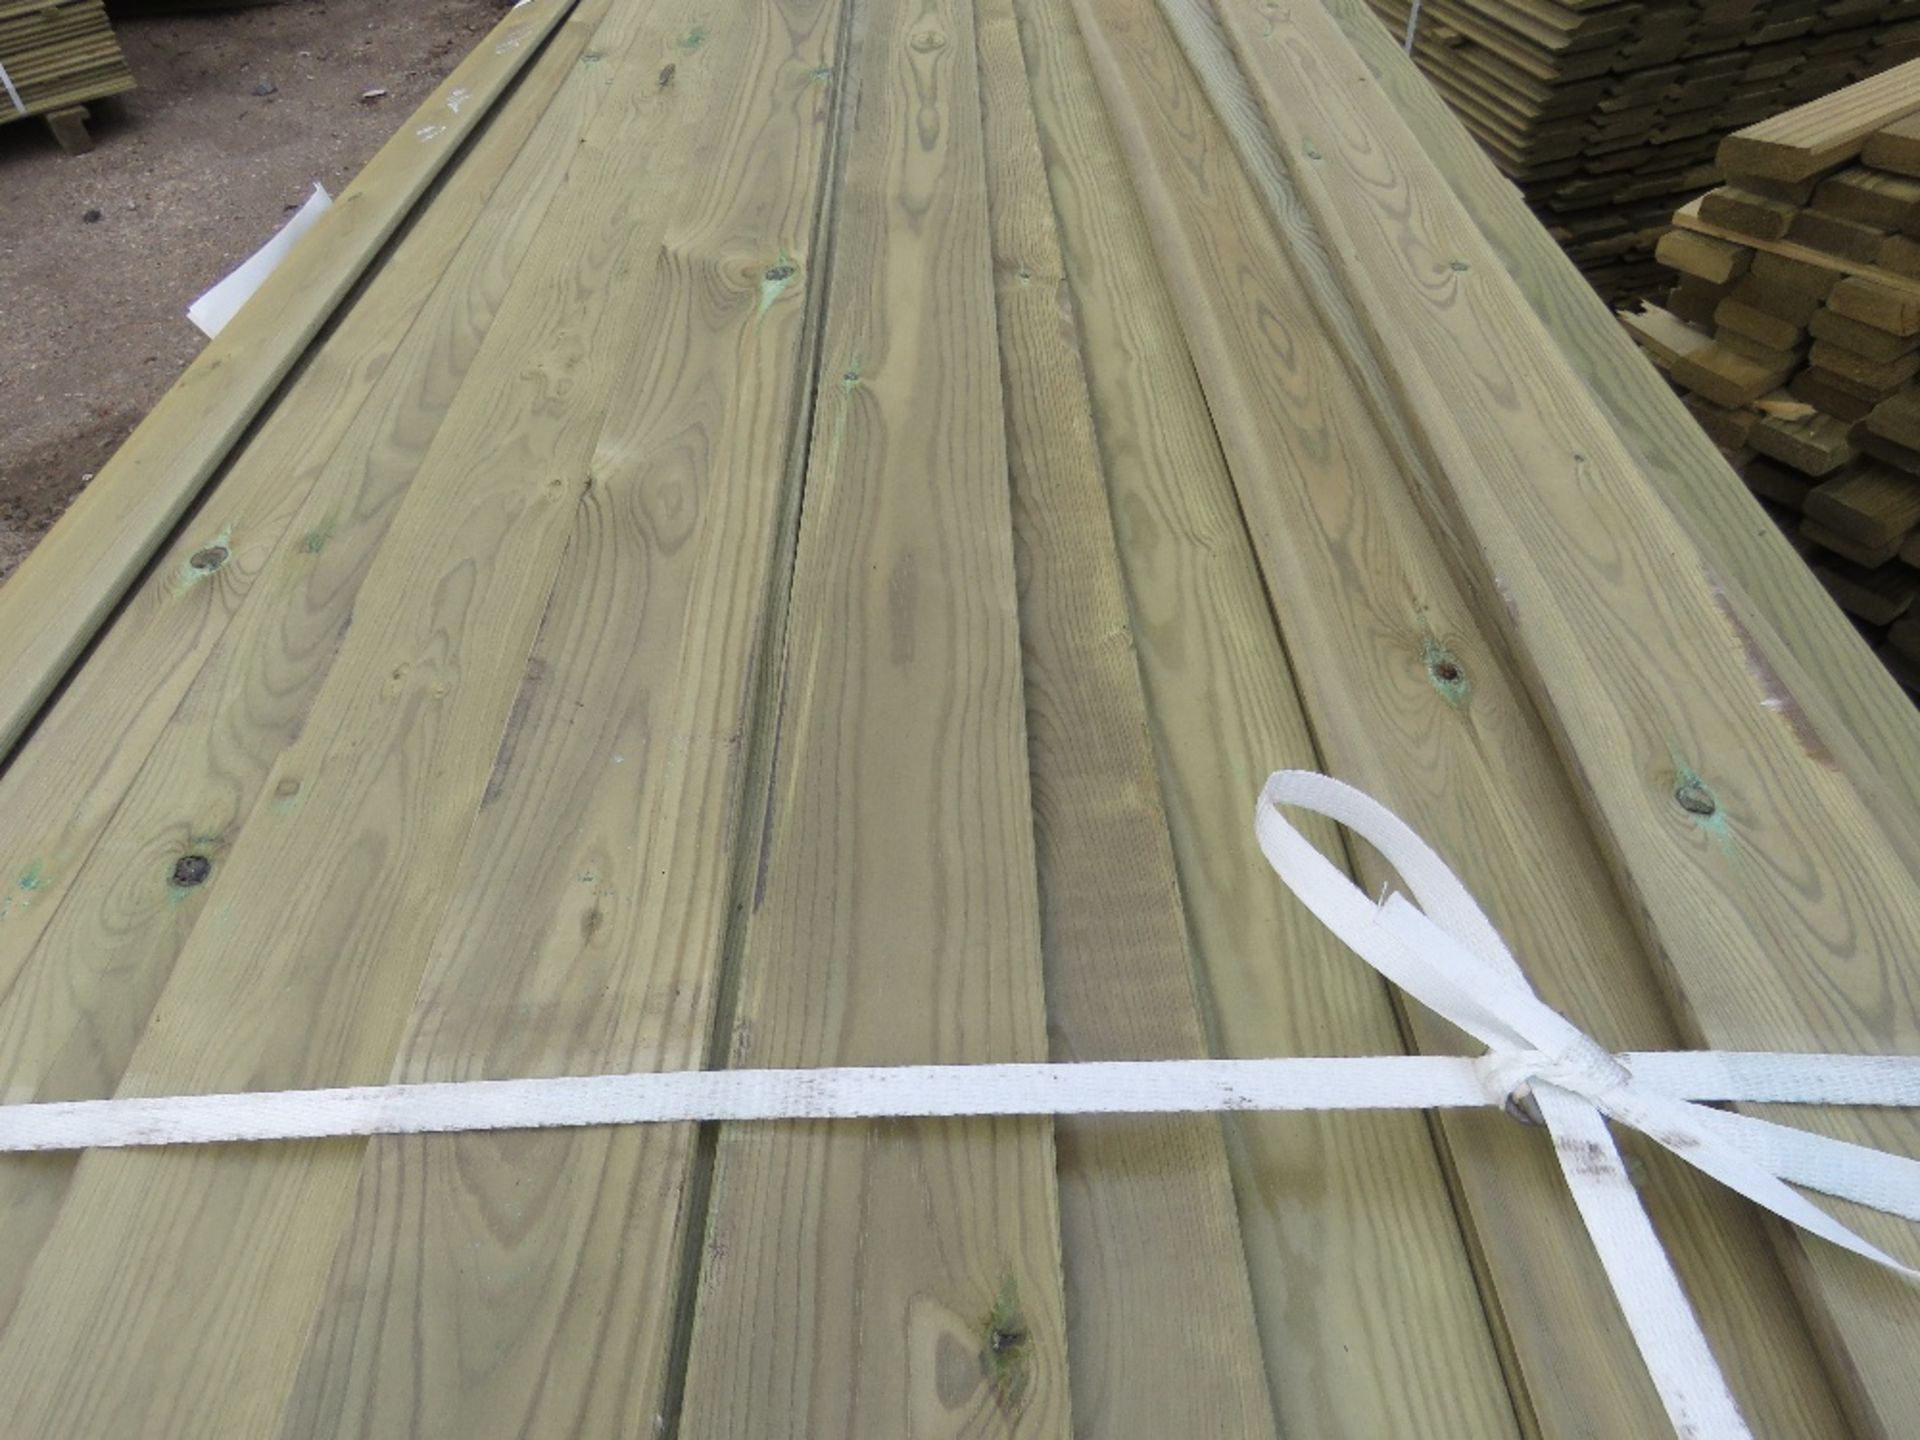 LARGE PACK OF FLAT SLAT CLADDING TIMBER 1.75METRES LENGTH X 9.5CM WIDE X 0.7CM DEPTH APPROX - Image 3 of 4